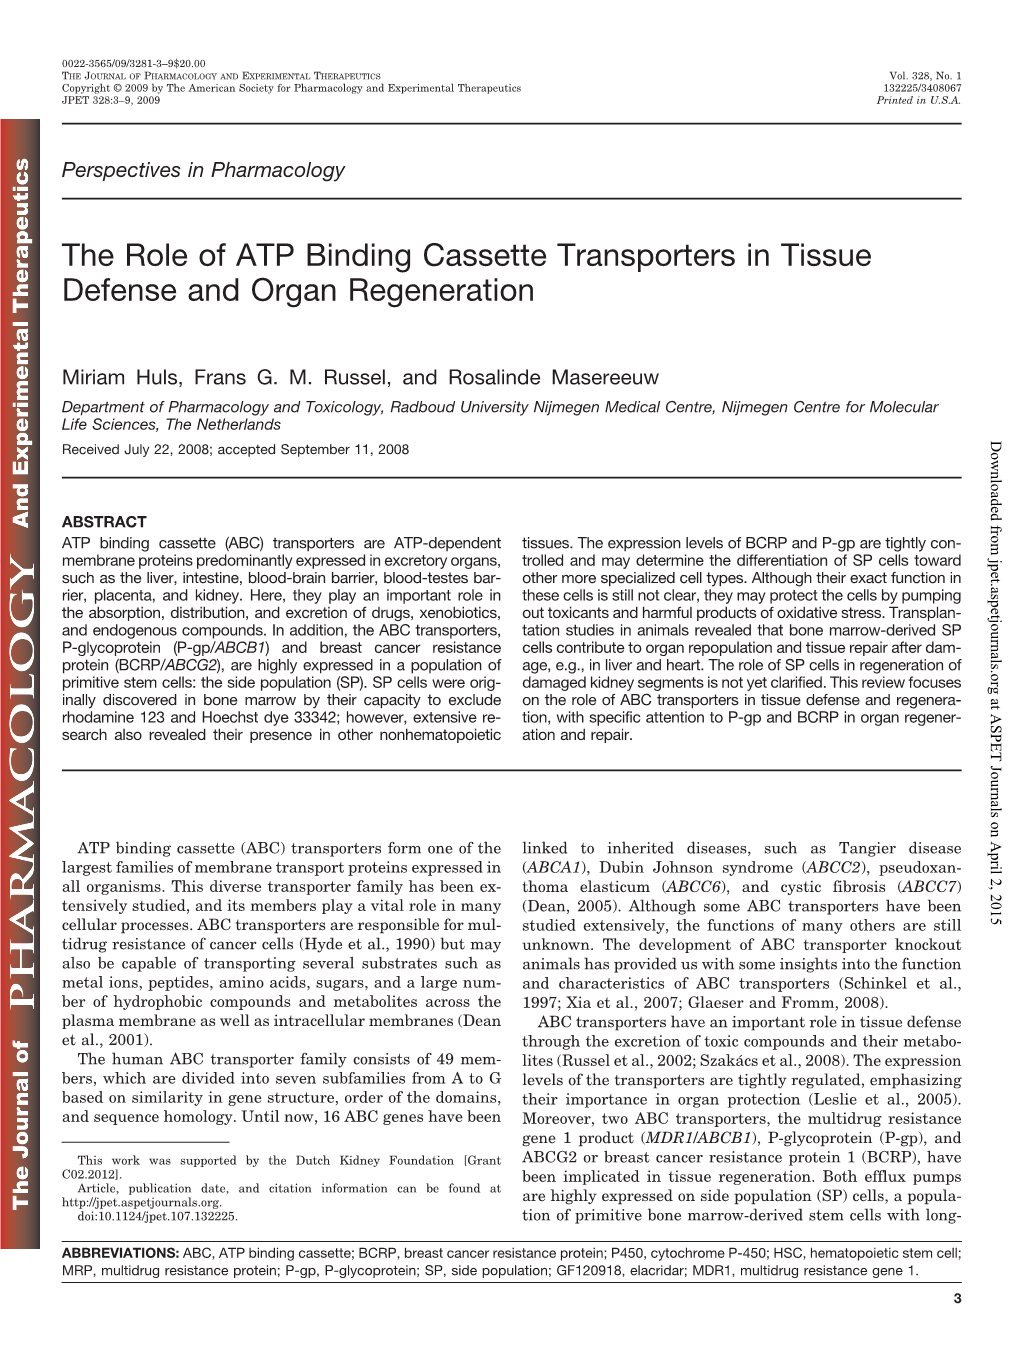 The Role of ATP Binding Cassette Transporters in Tissue Defense and Organ Regeneration